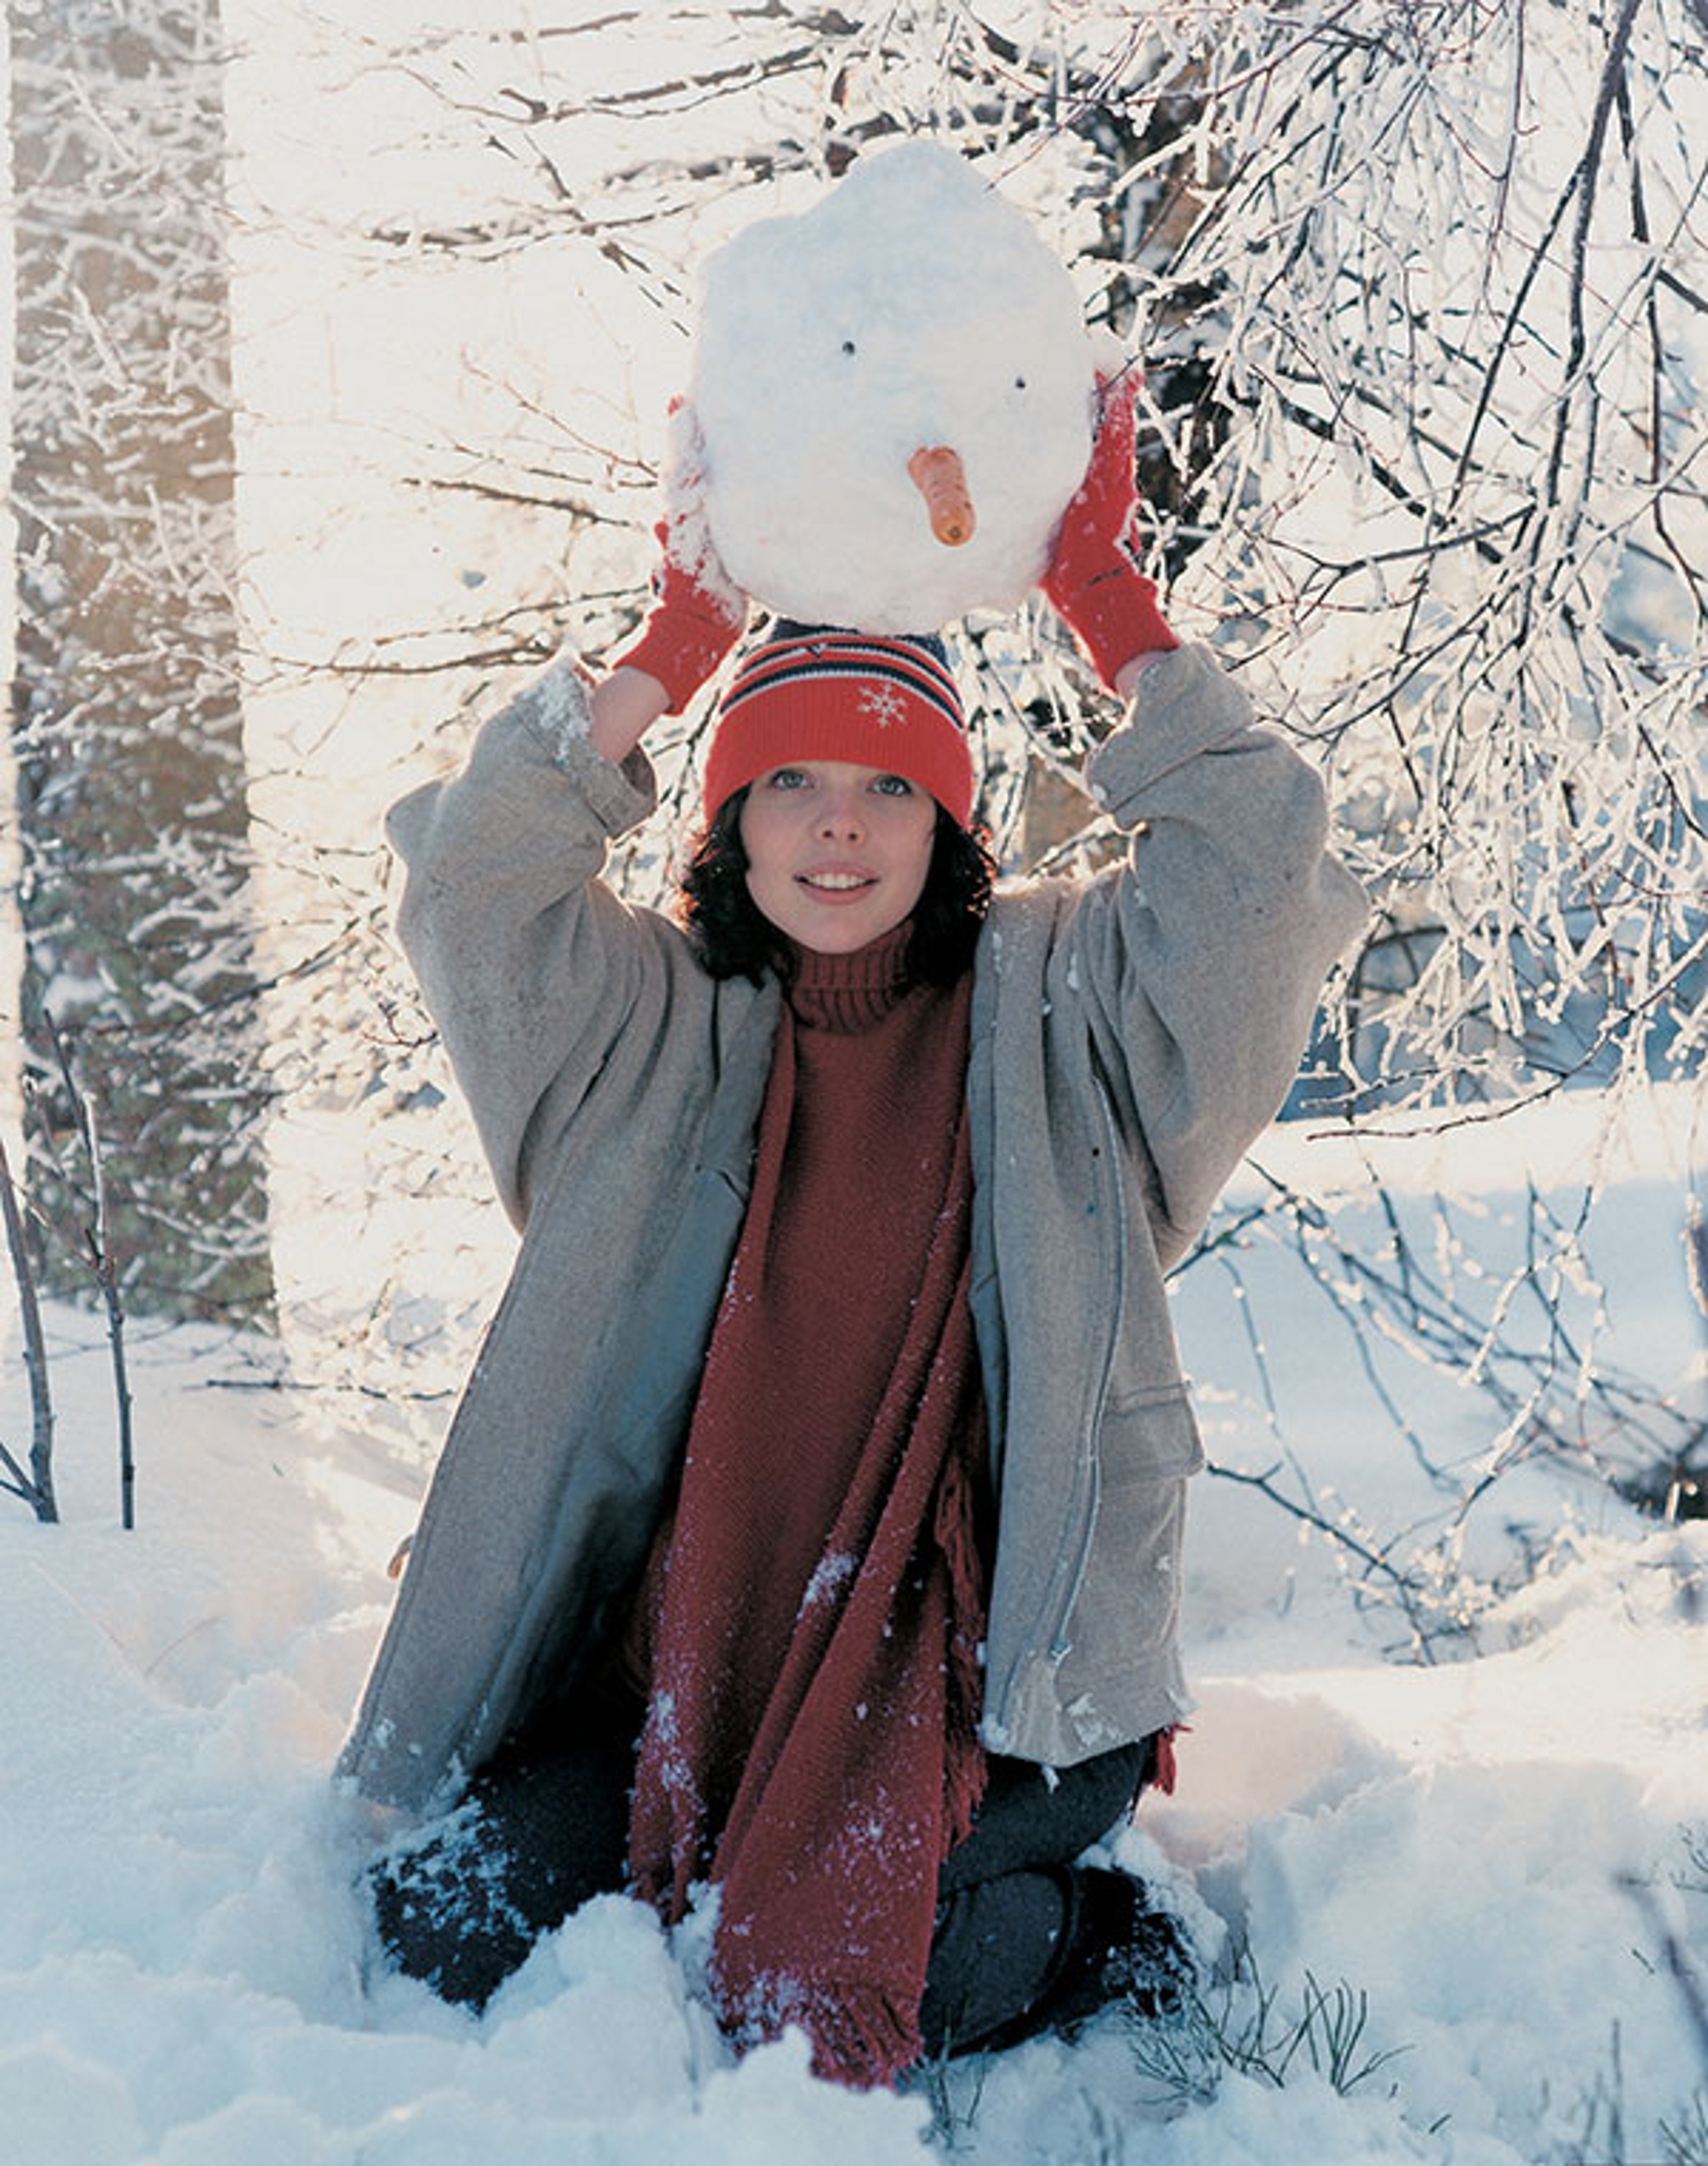 A woman sitting in snow, holding a snowman's head on top of hers.